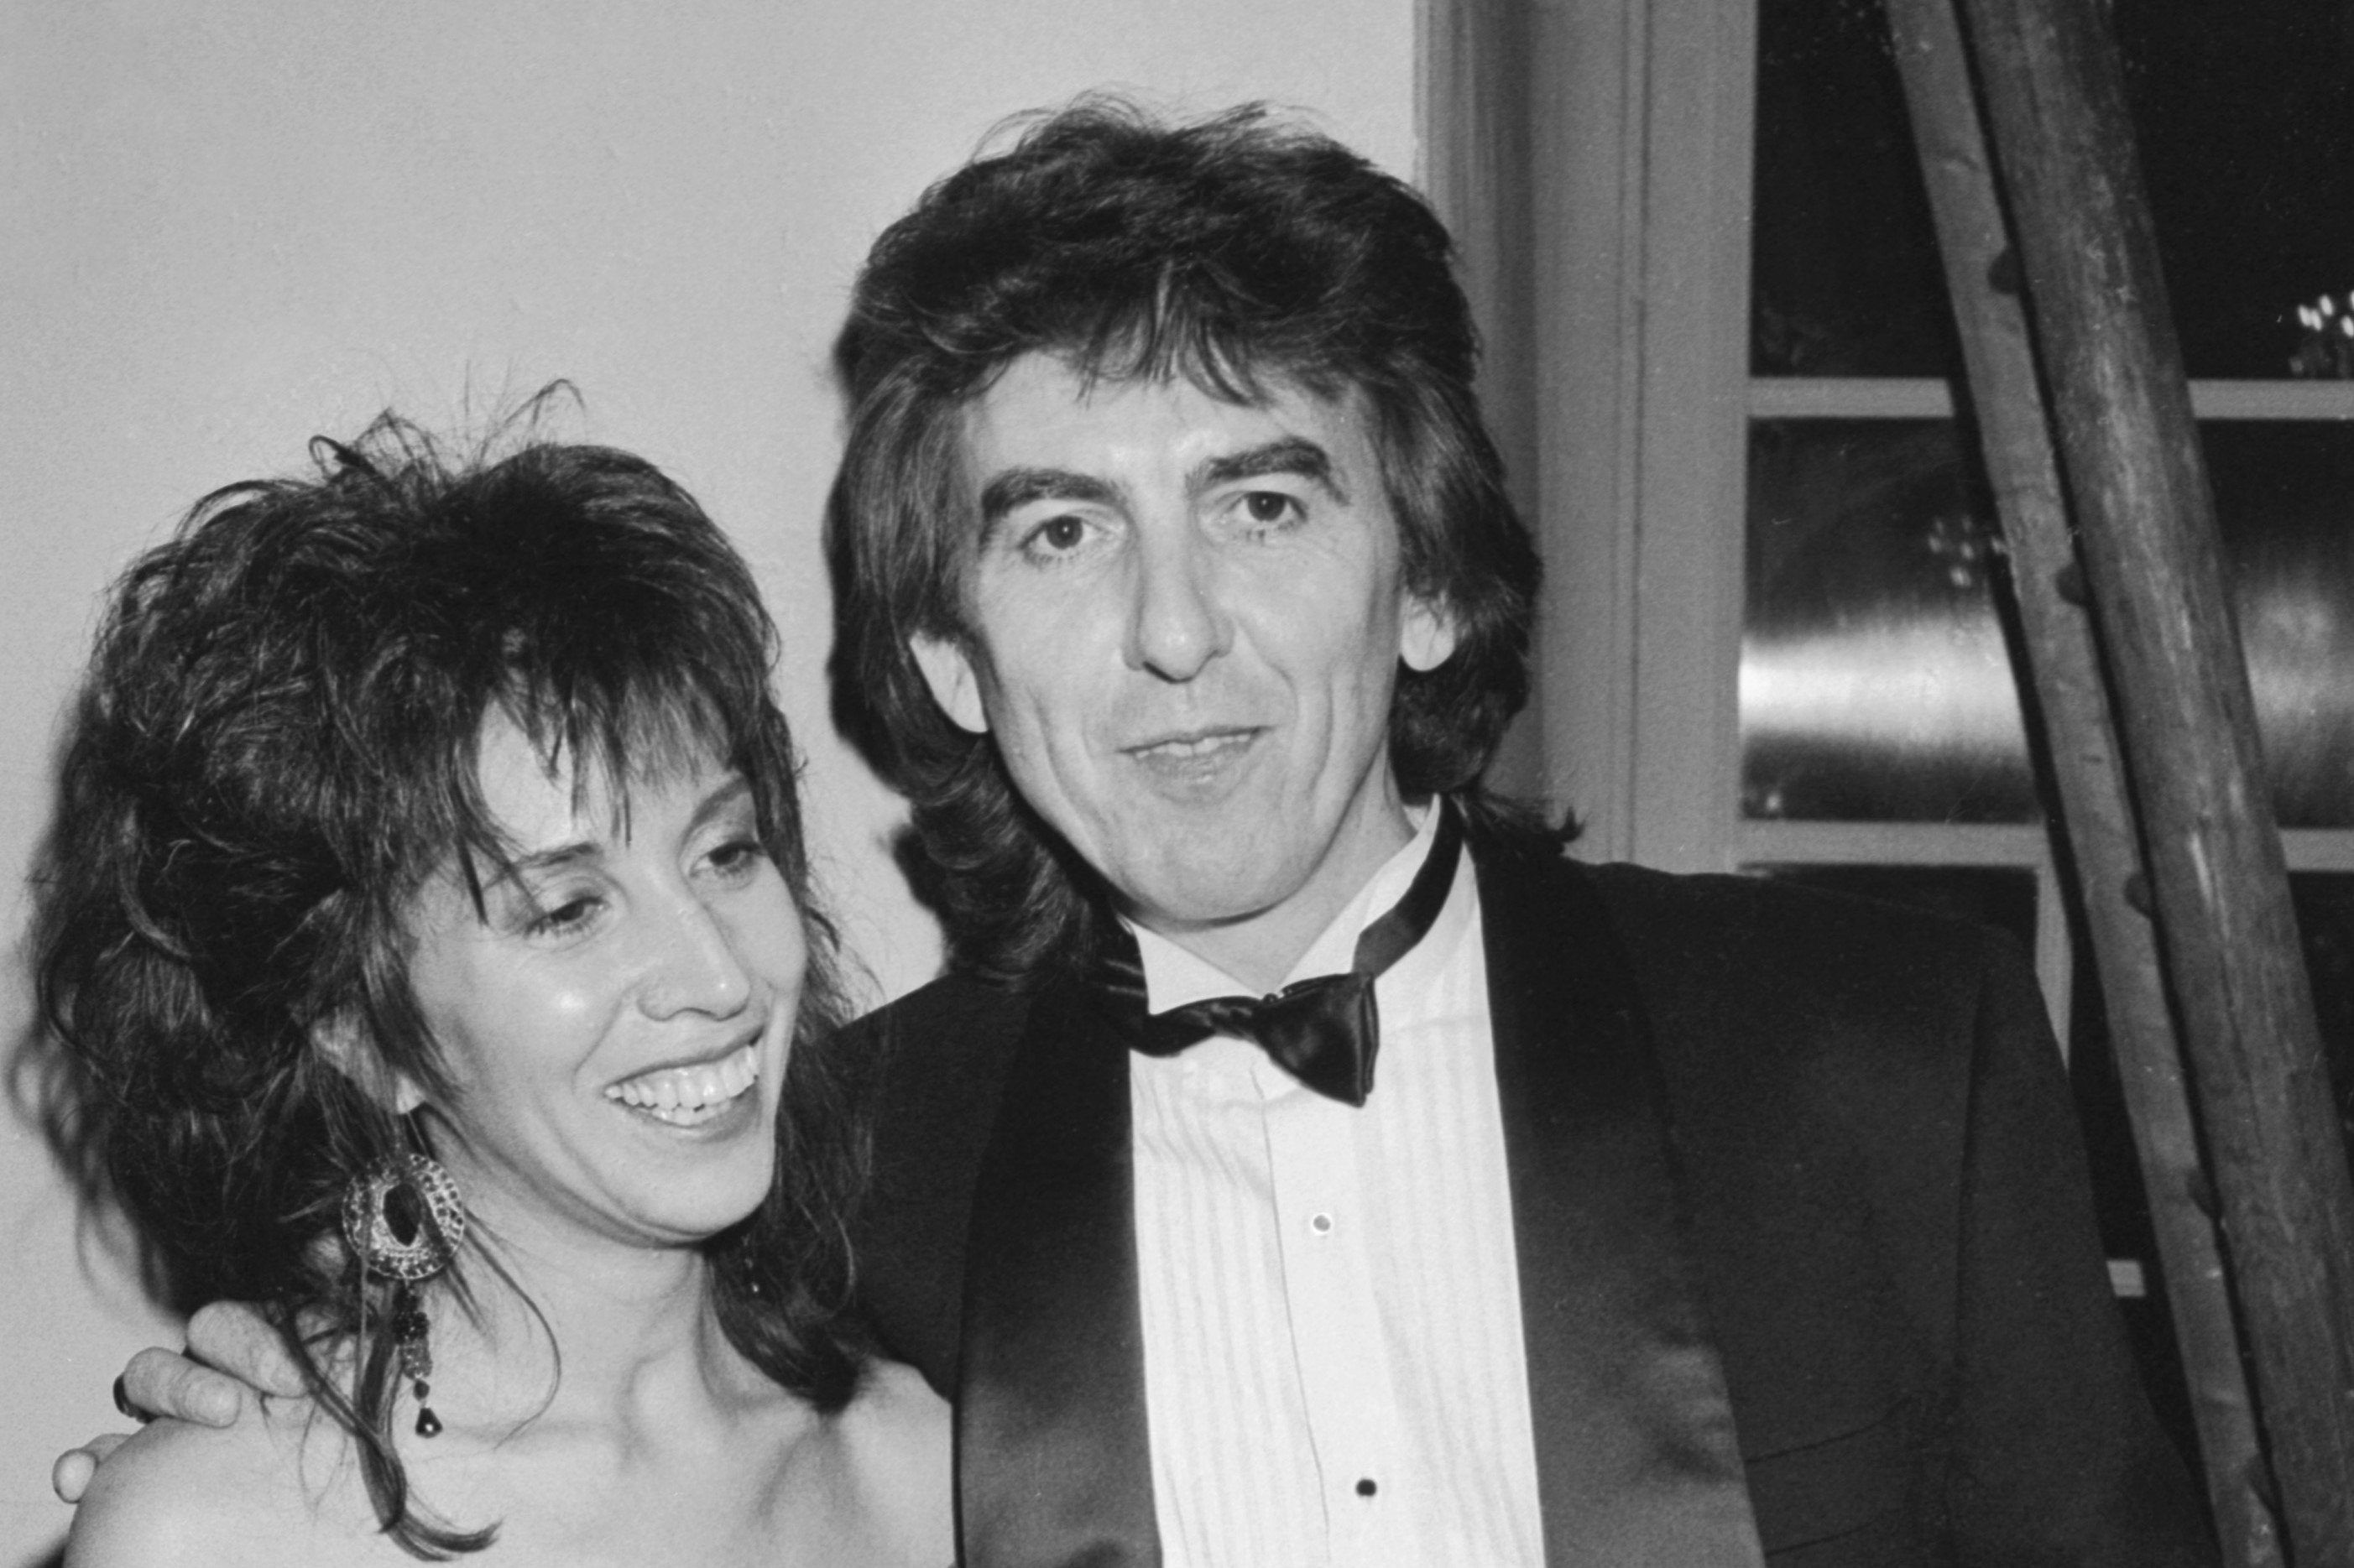 A black and white picture of George Harrison in a tuxedo with his arm around his wife Olivia Harrison's shoulders.